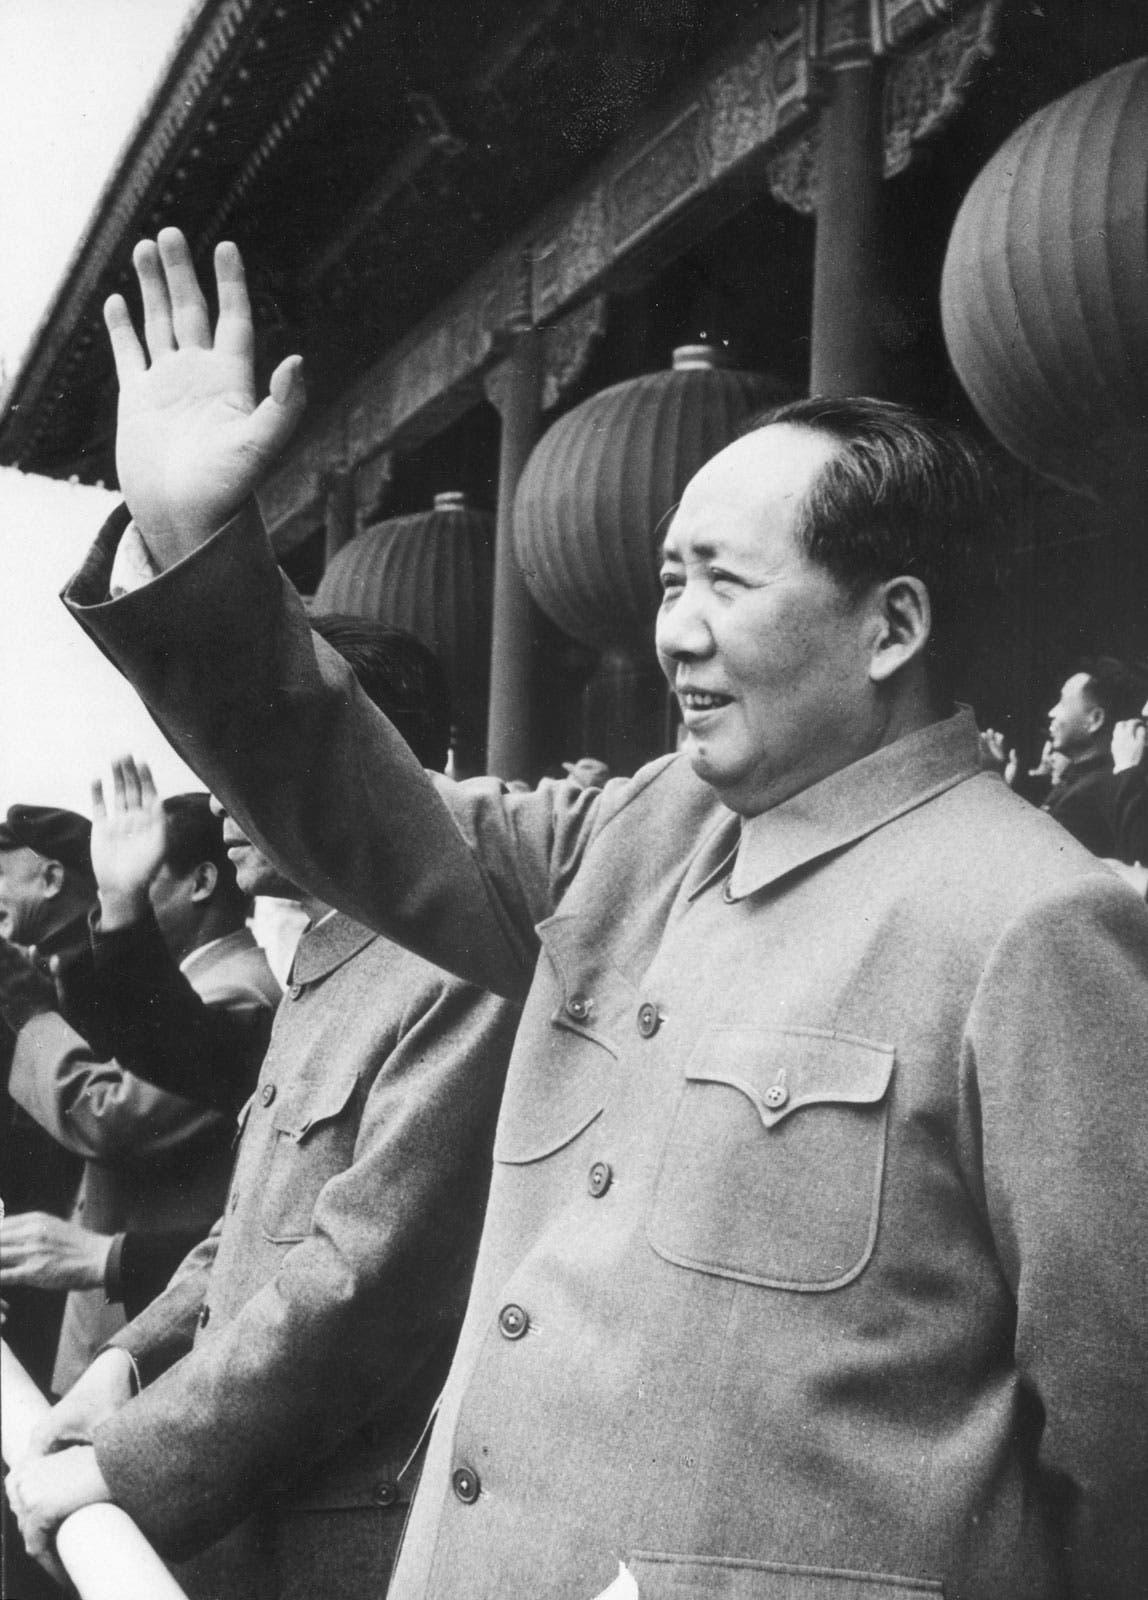 A portrait of the founder of the People's Republic of China, Mao Zedong